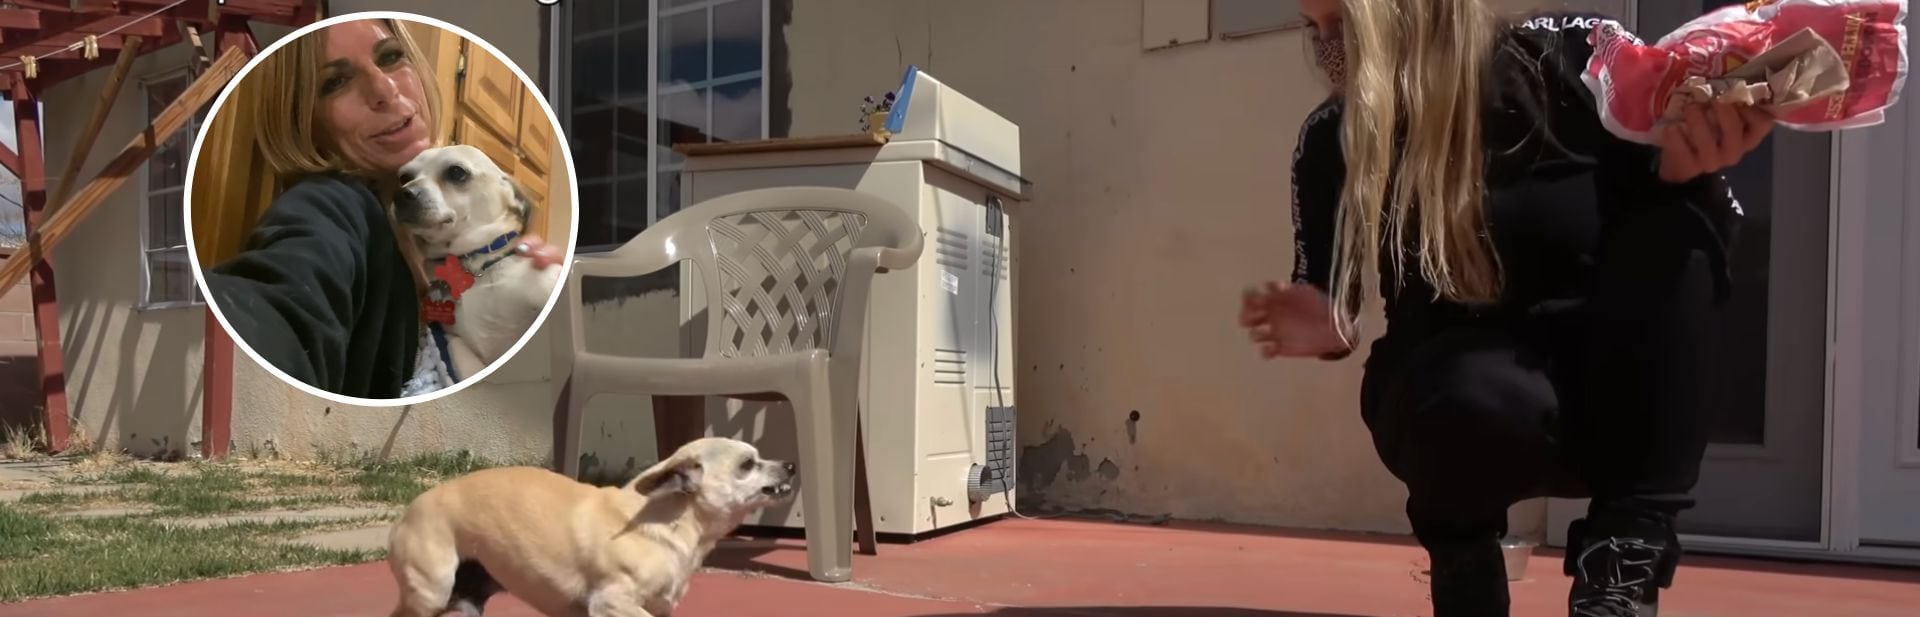 Scared Chihuahua Learns To Trust Again Thanks To A Kind Rescuer